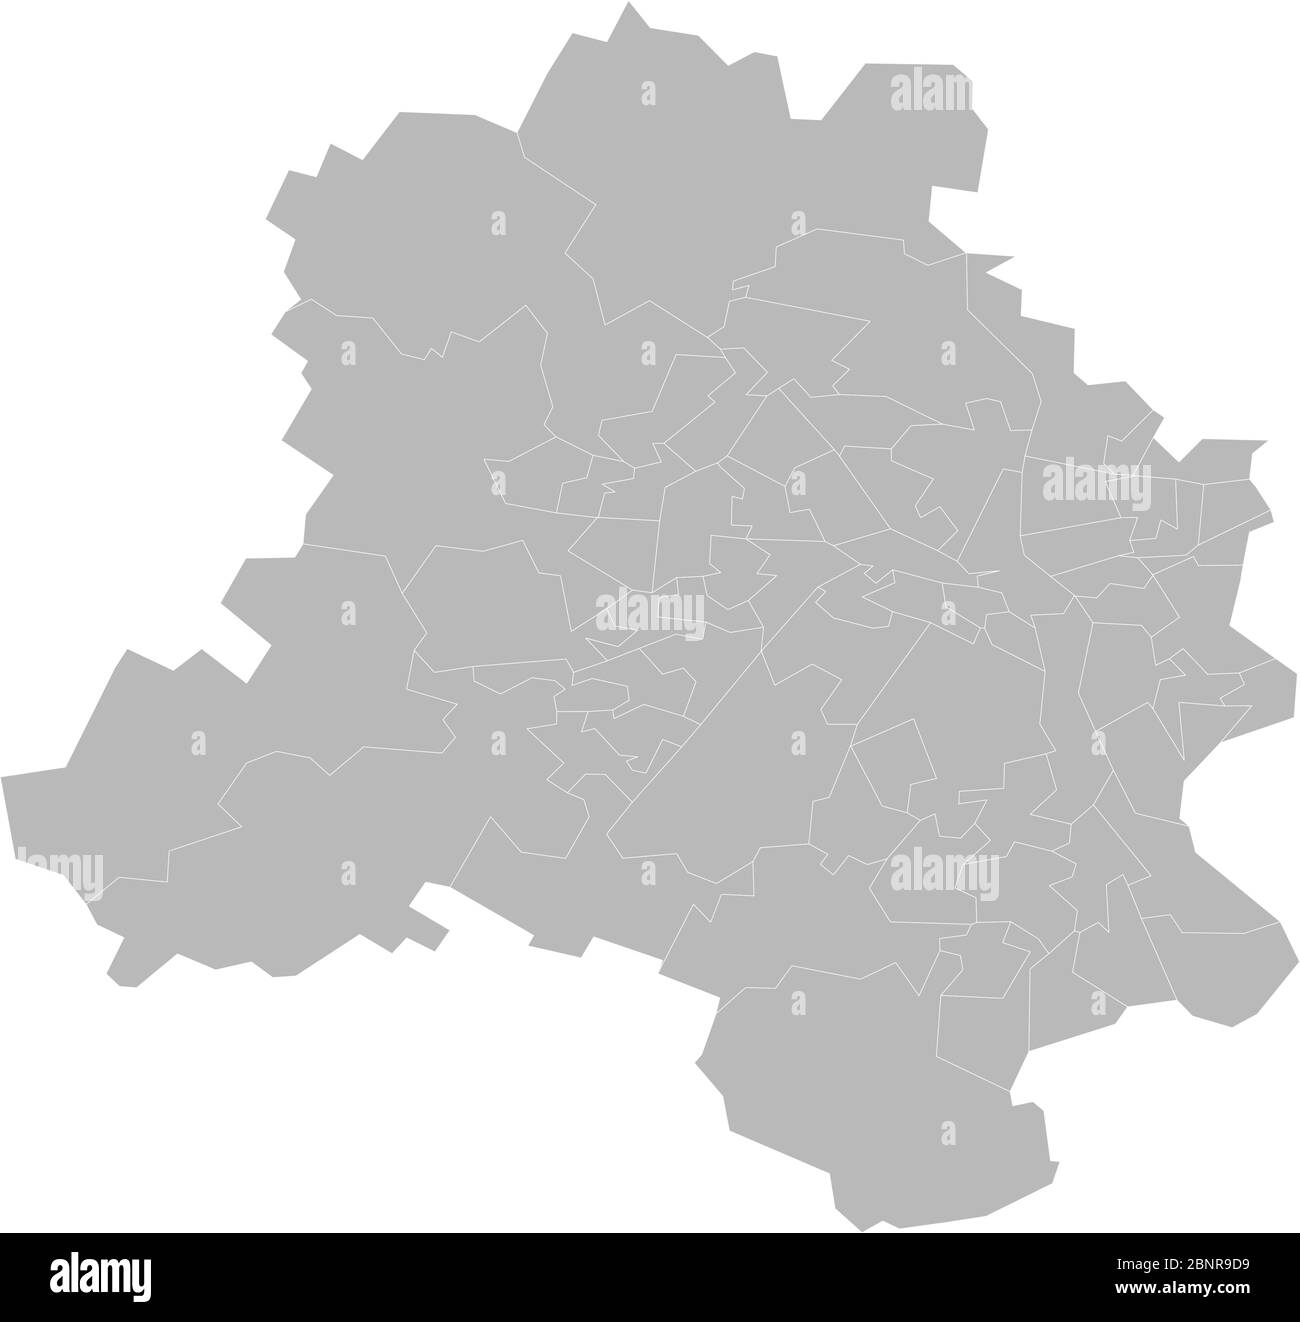 Delhi assembly constituency map vector. Gray background. Business concepts, backgrounds. Stock Vector